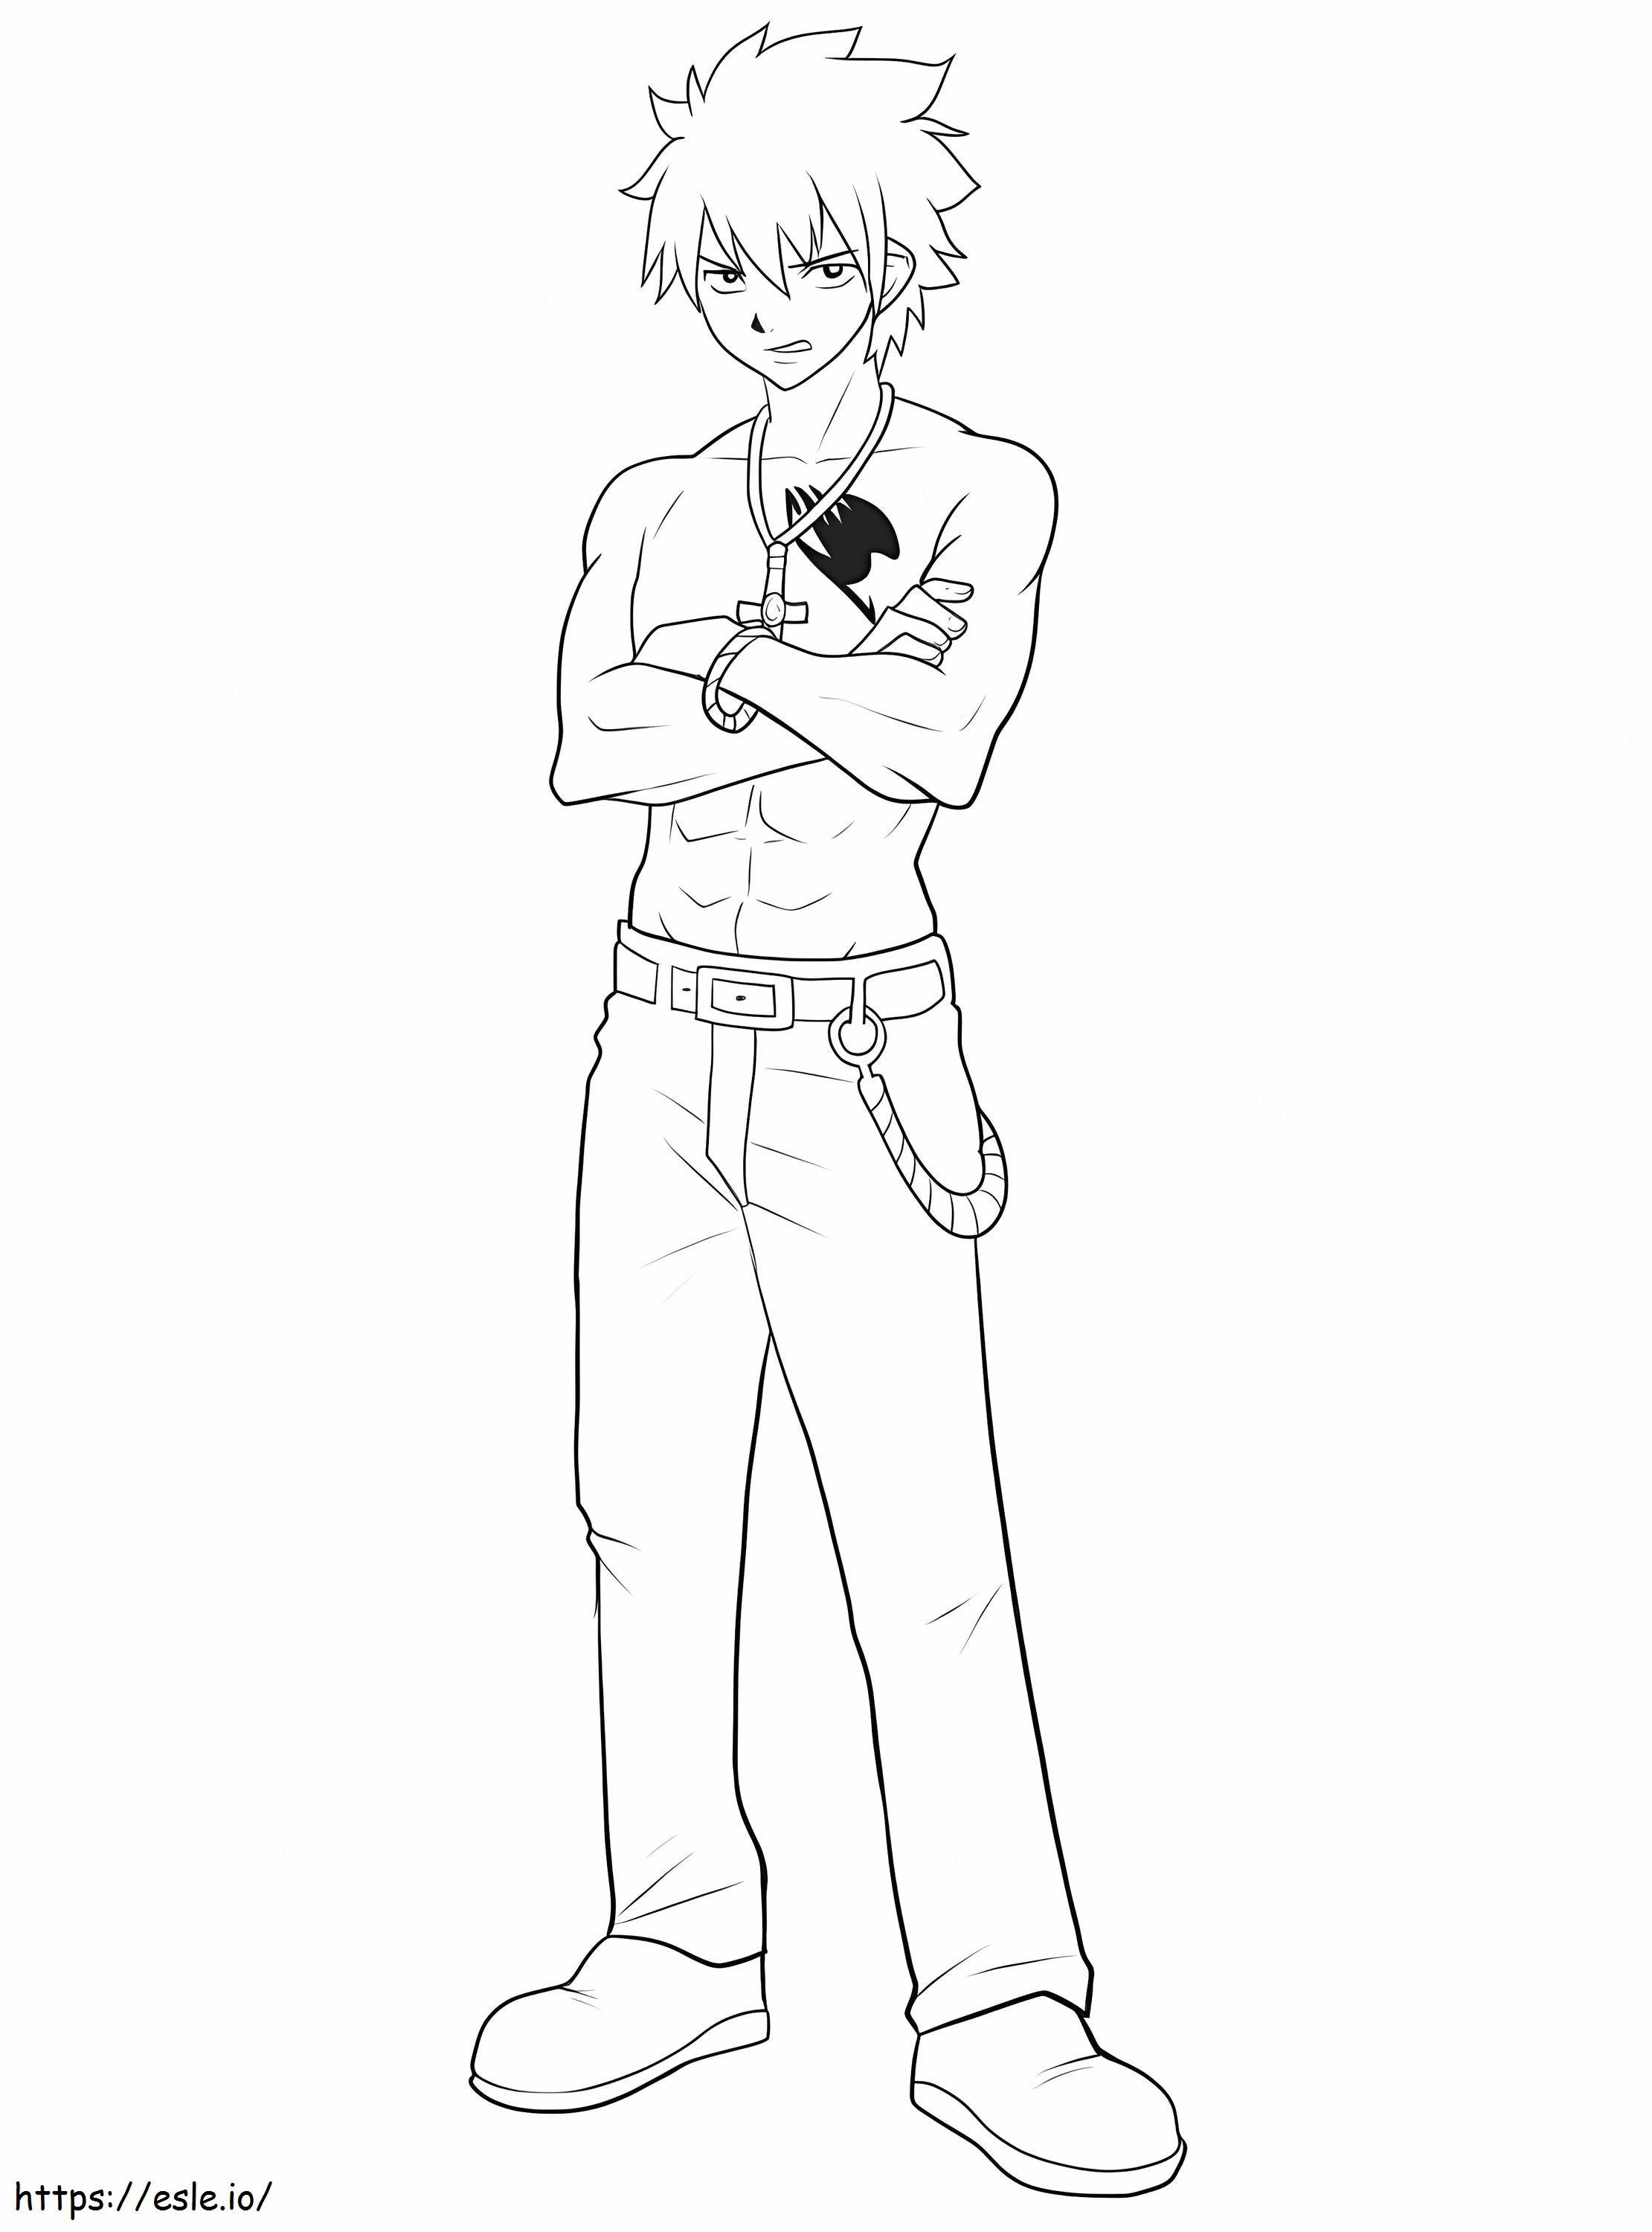 Grey Fullbuster Fairy Tail 758X1024 coloring page